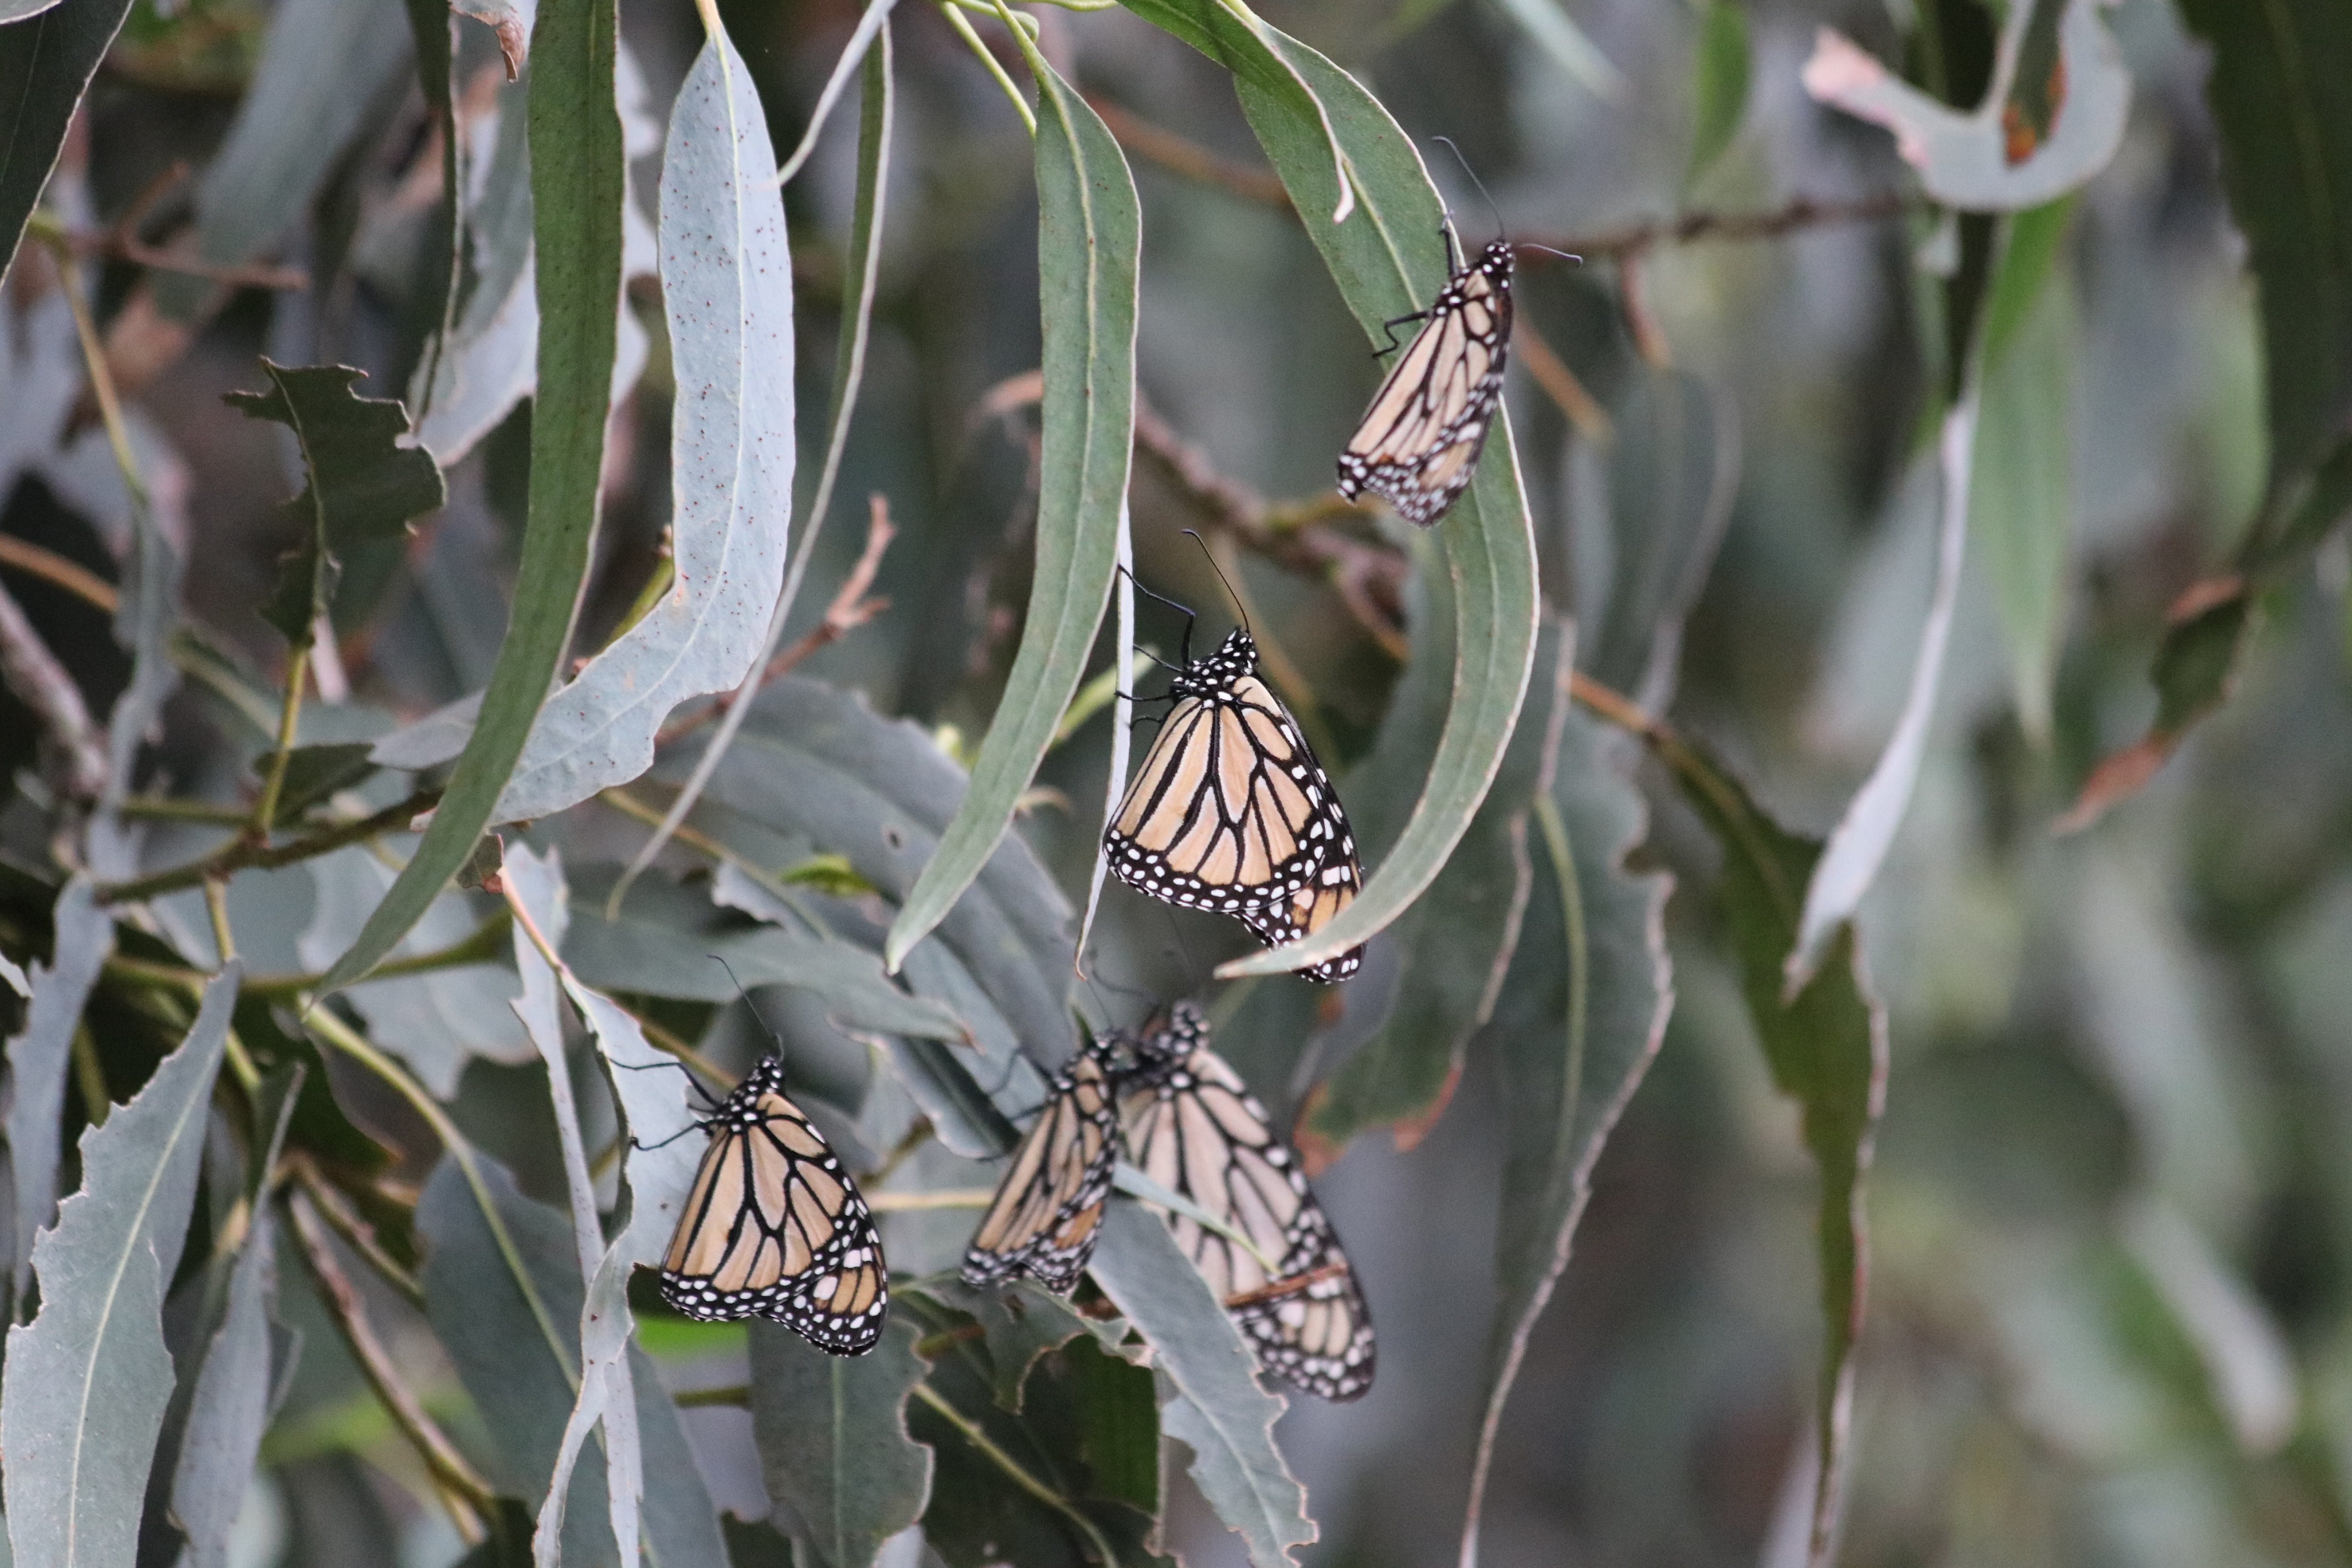 "Small clusters of monarch at an overwintering site"